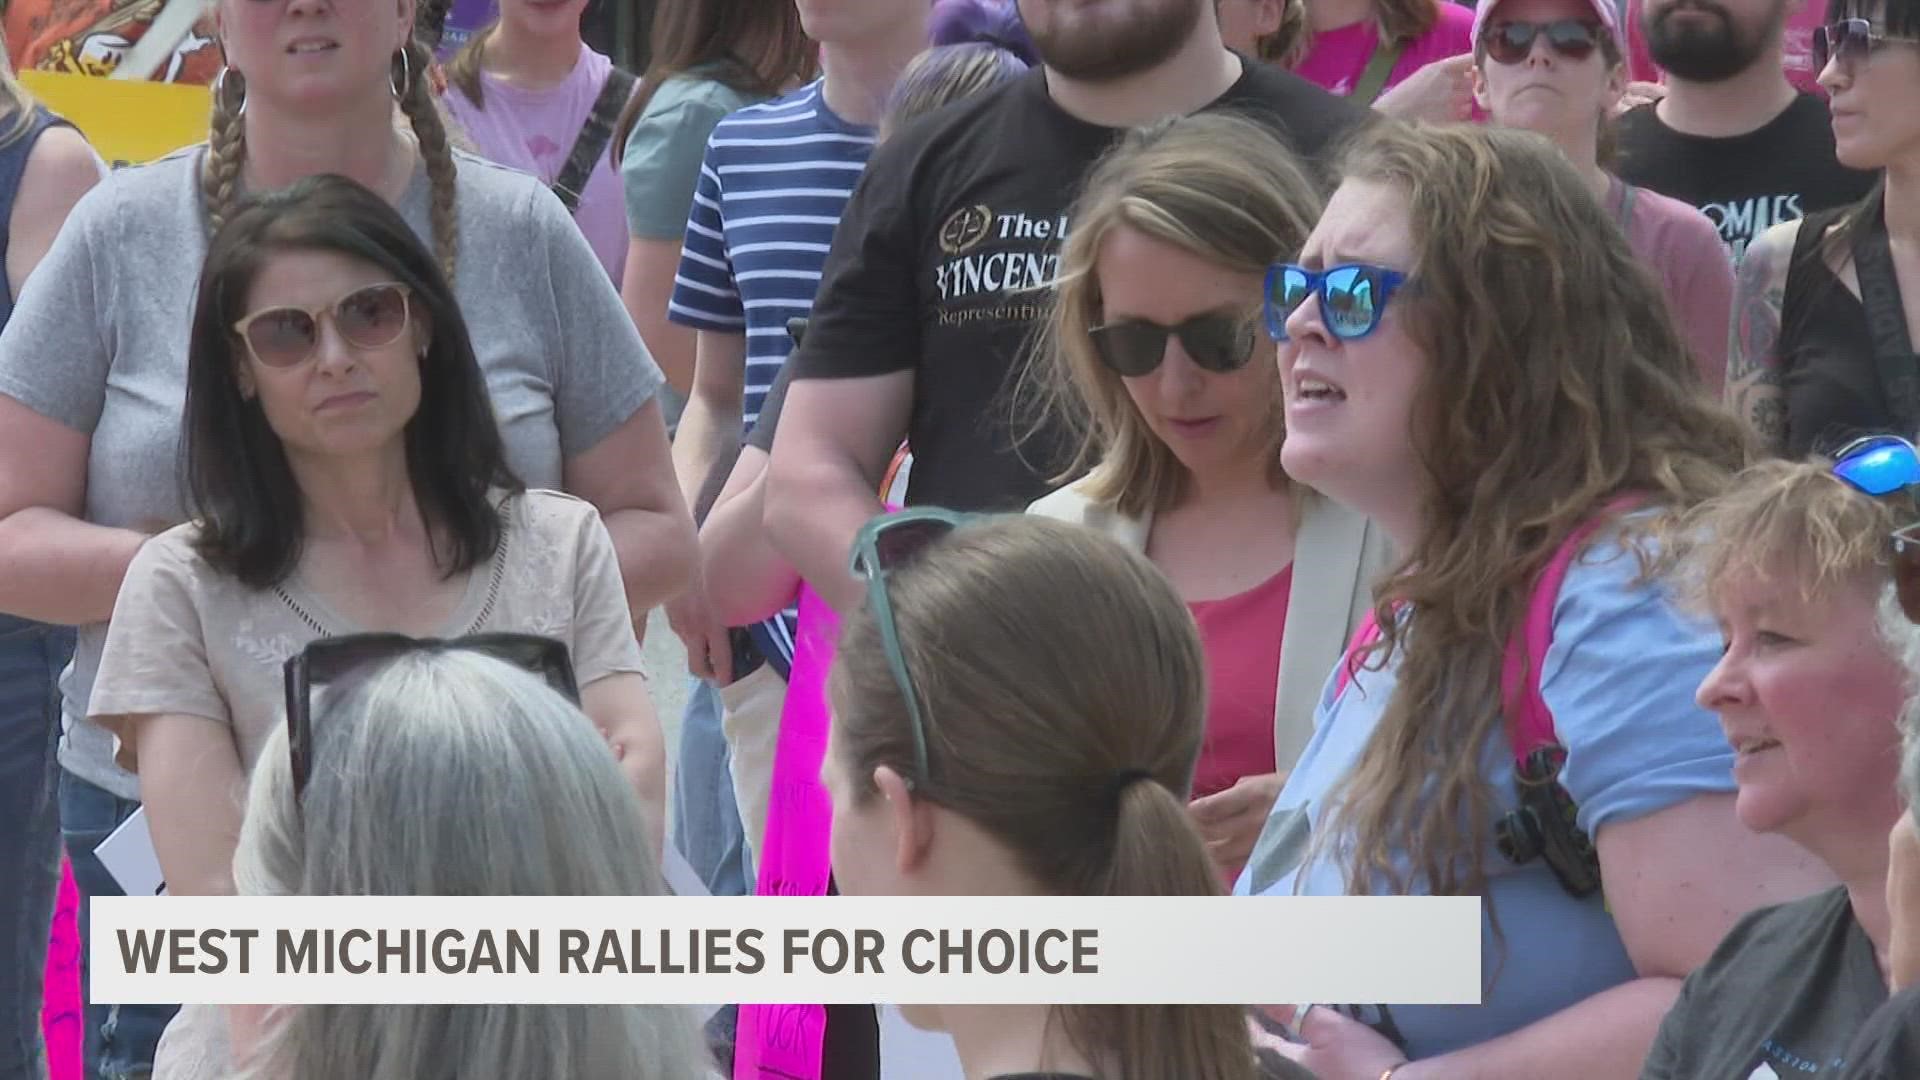 More than 400 cities in the US hosted pro-choice rallies on Saturday.